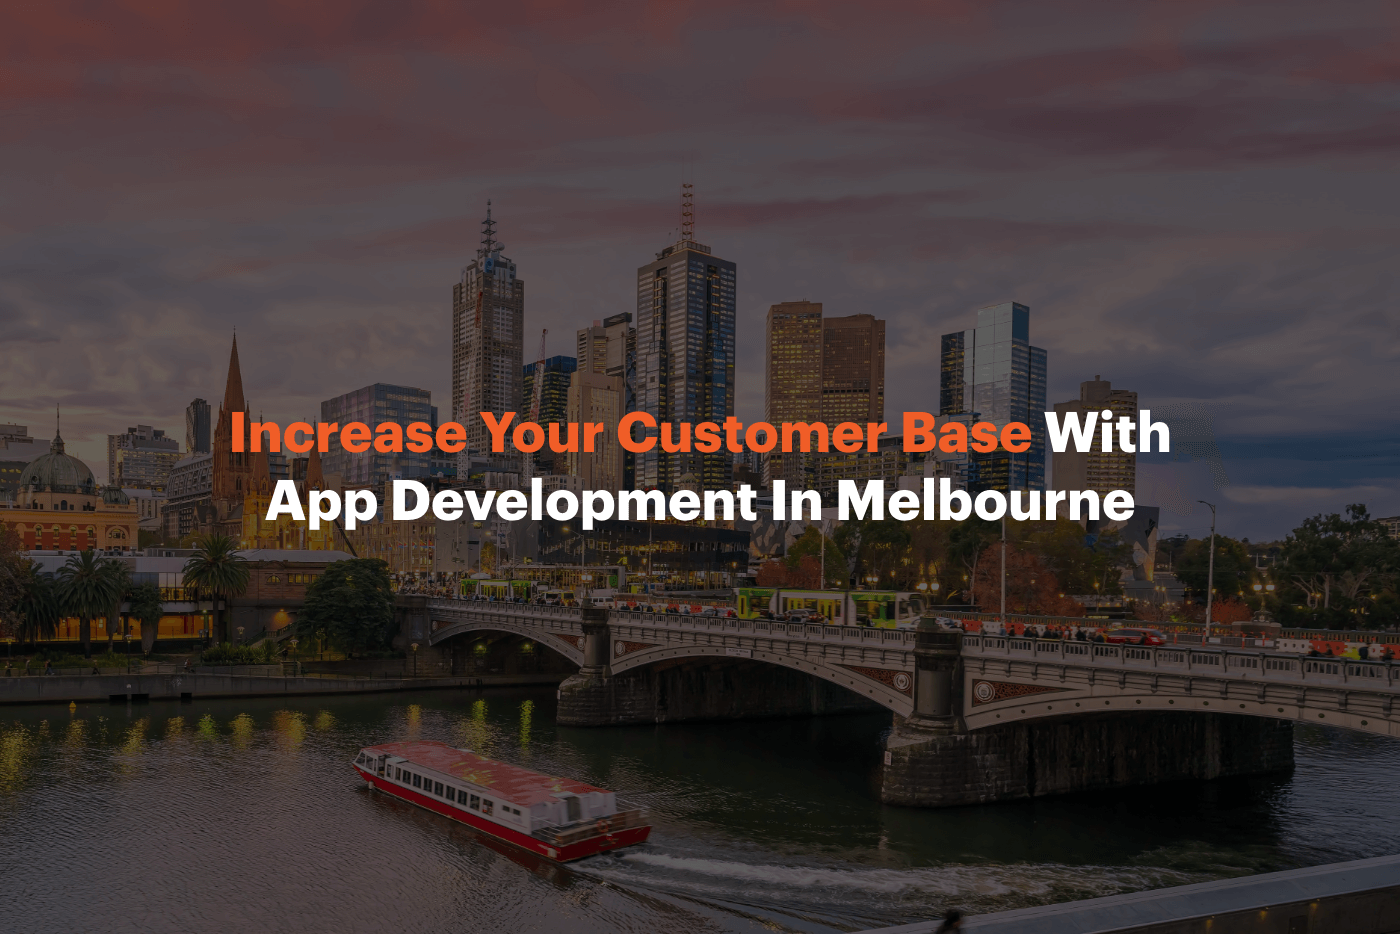 Increase your Customer Base with App Development in Melbourne